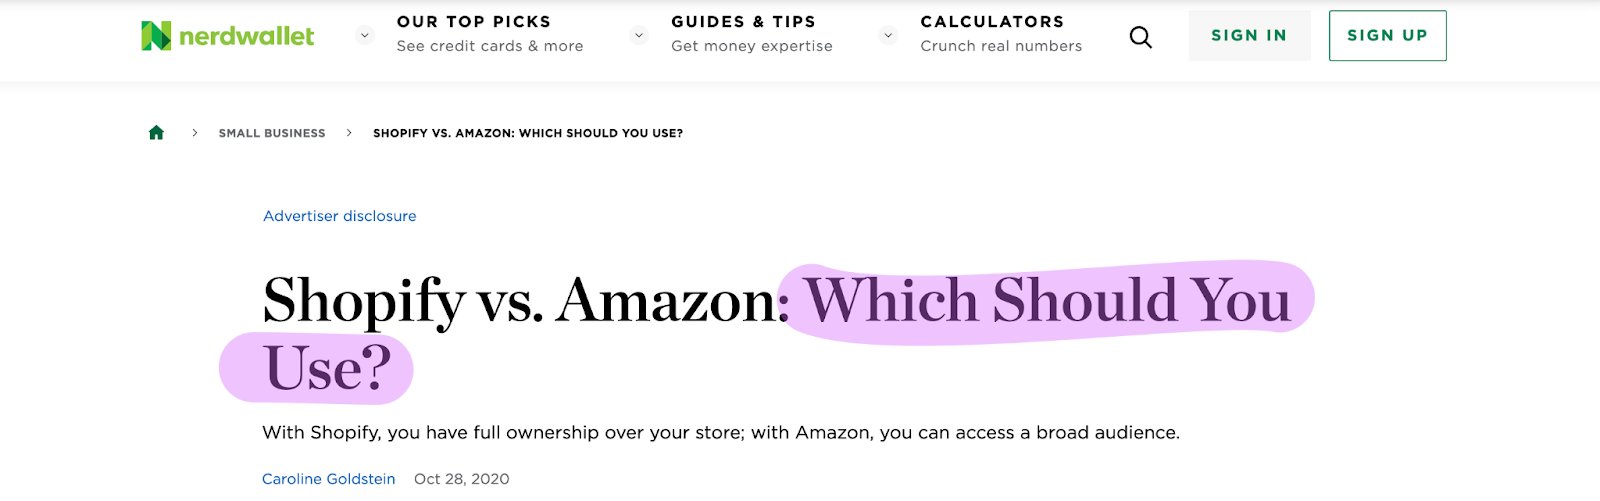 headline with both product names and its product category